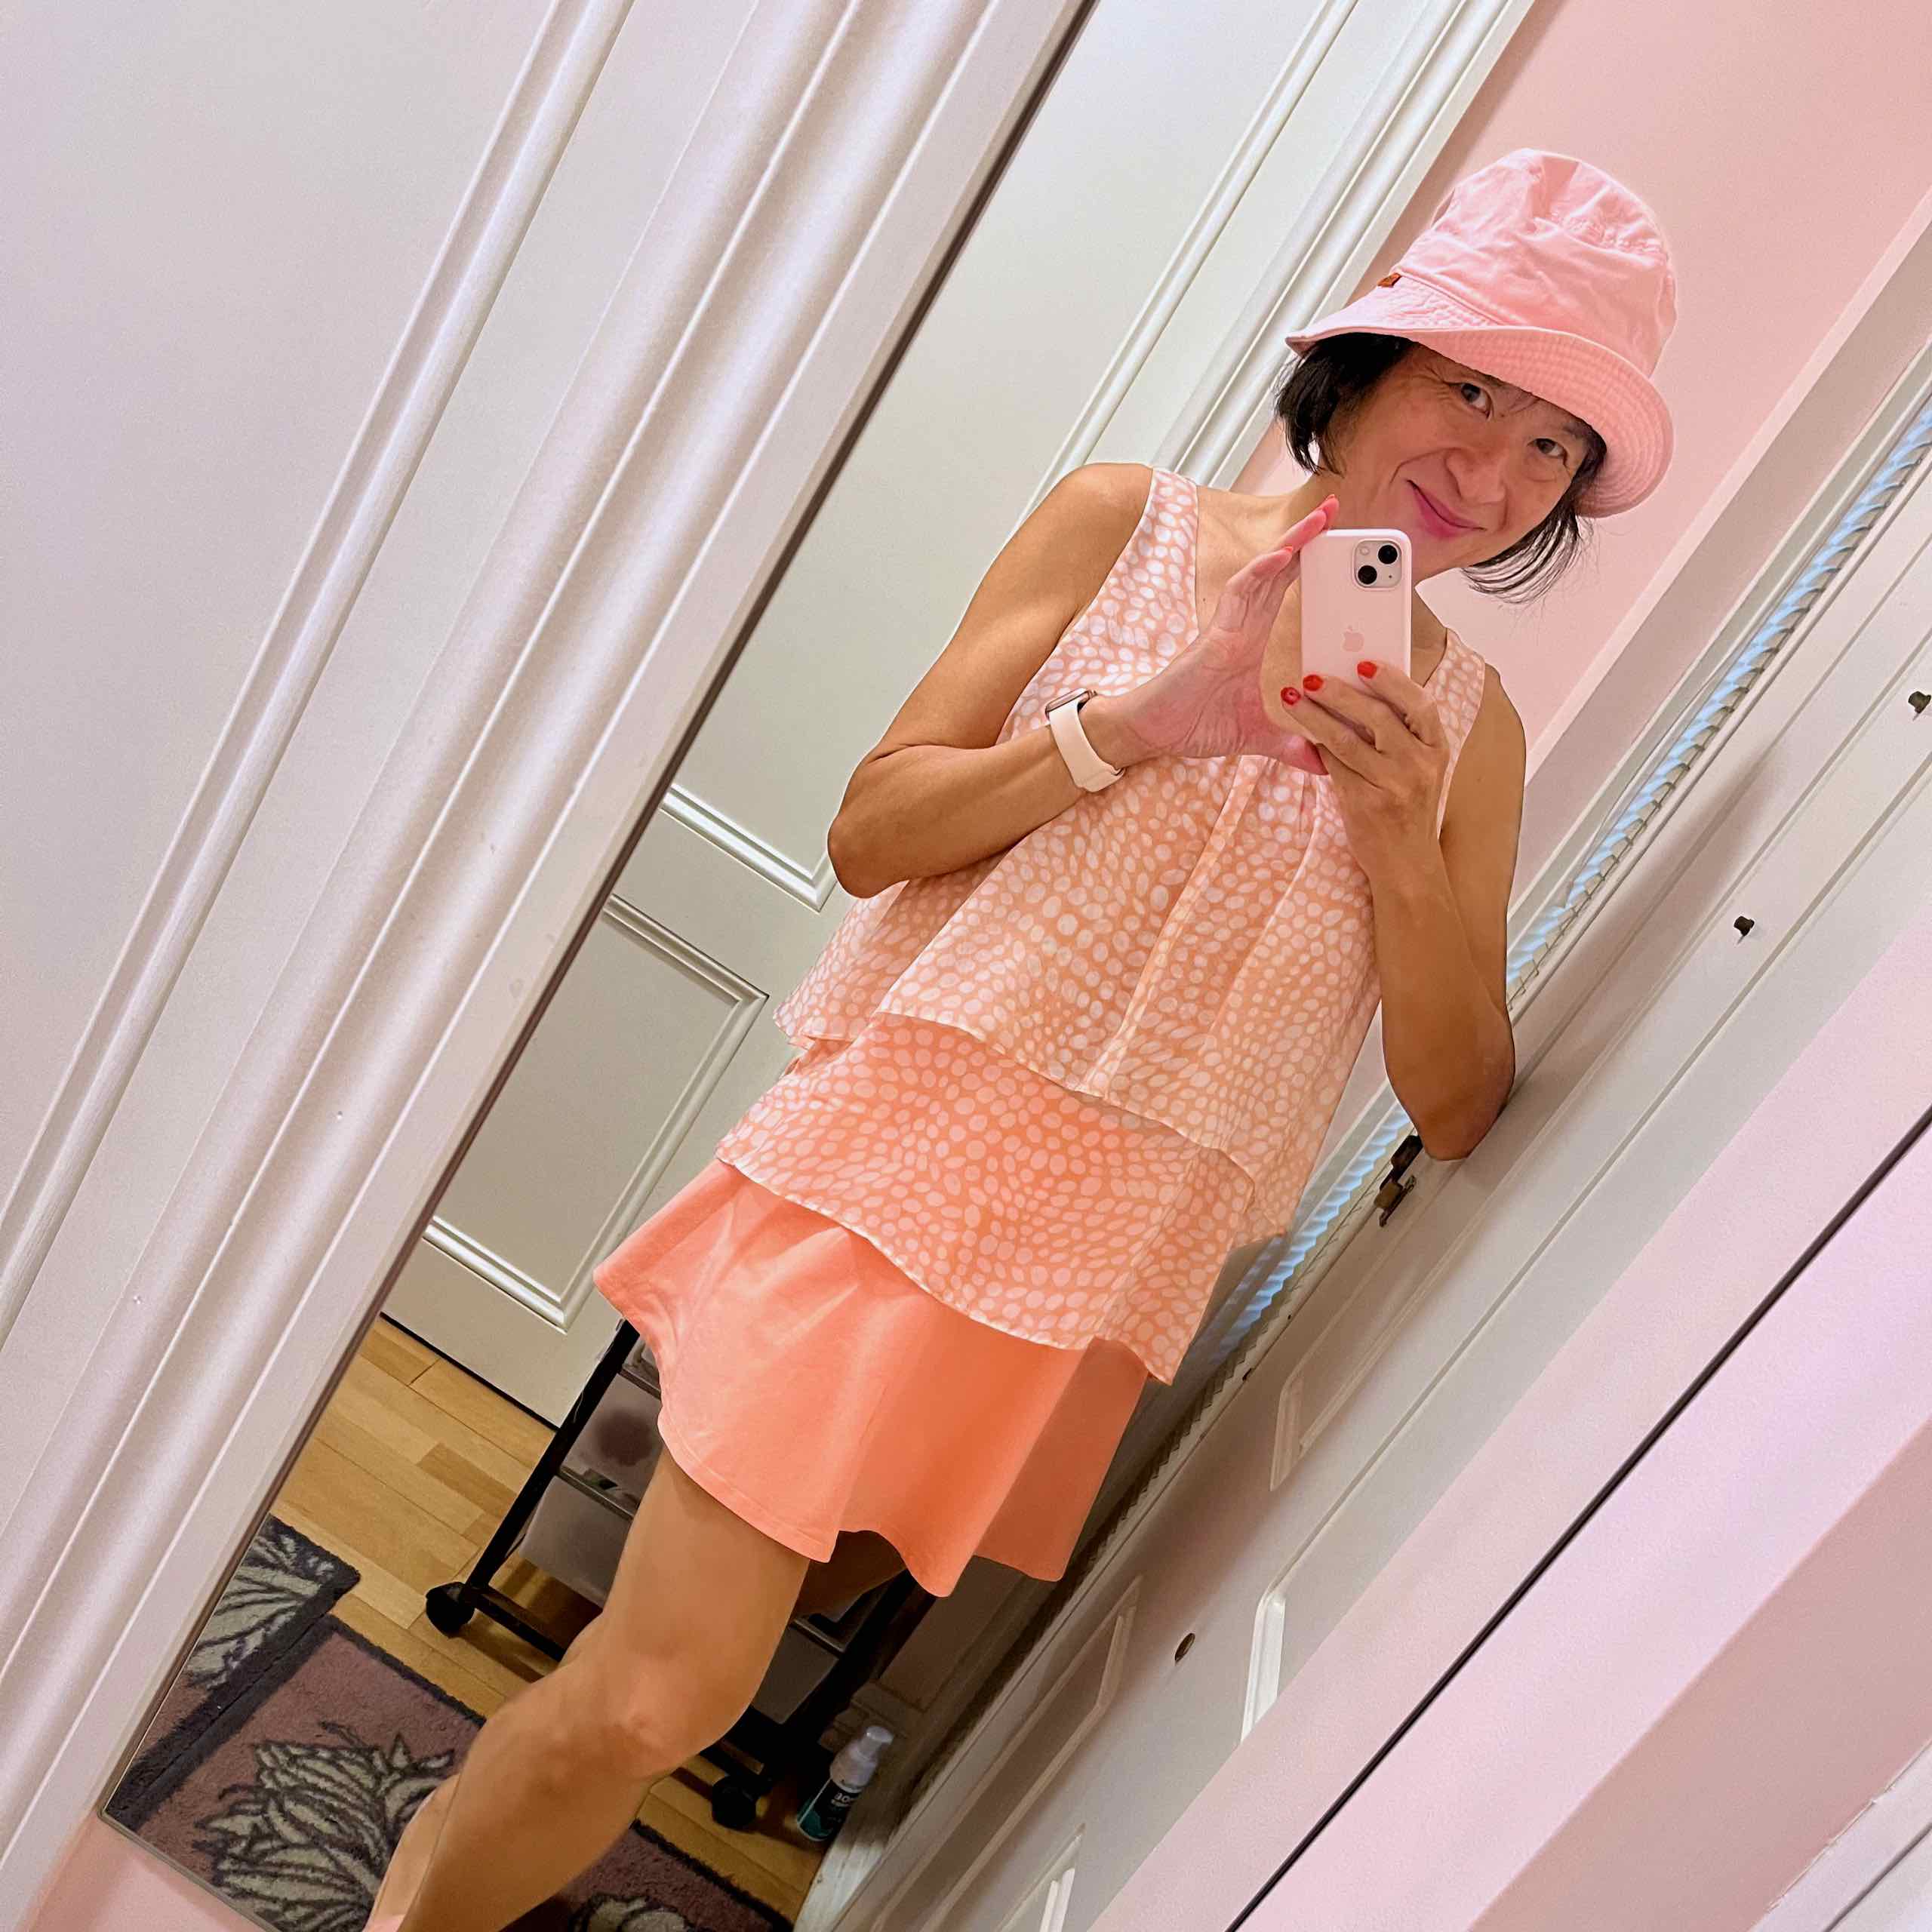 Peach polka dot outfit featured image